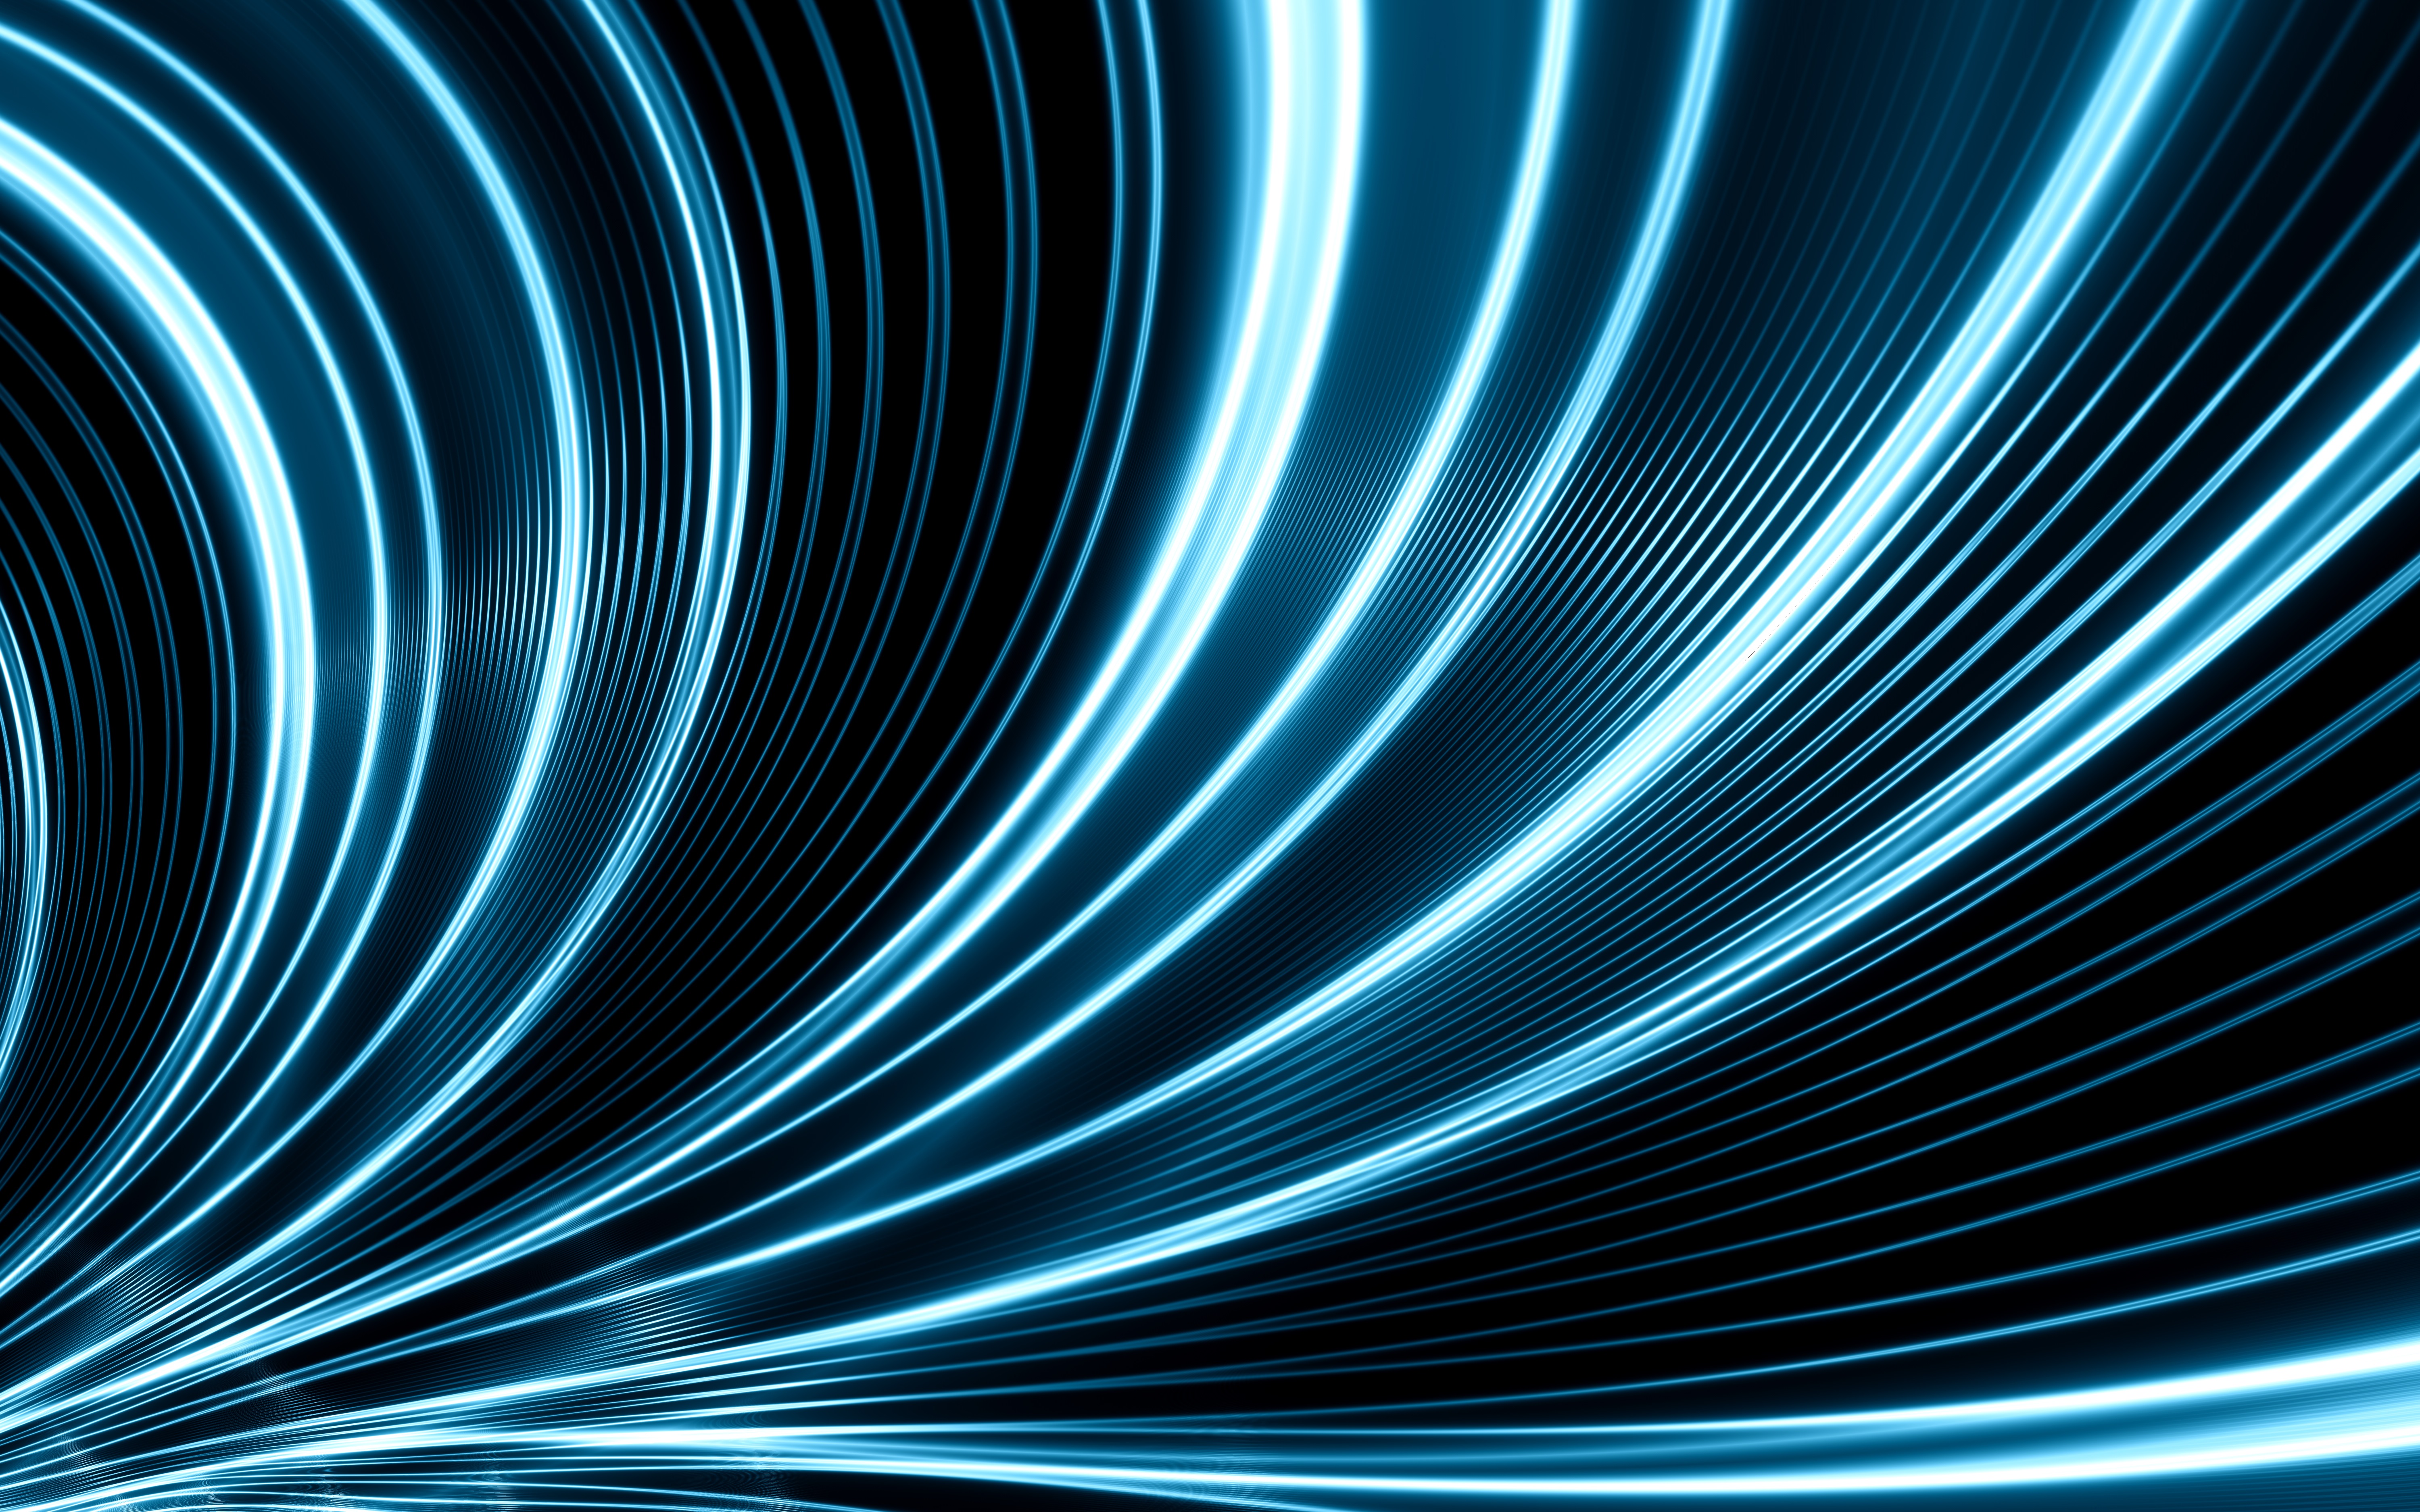 Abstract 3D Abstract Dynamic Blue Glowing Shiny Curved Digital Neon Lines Pattern 6000x3750